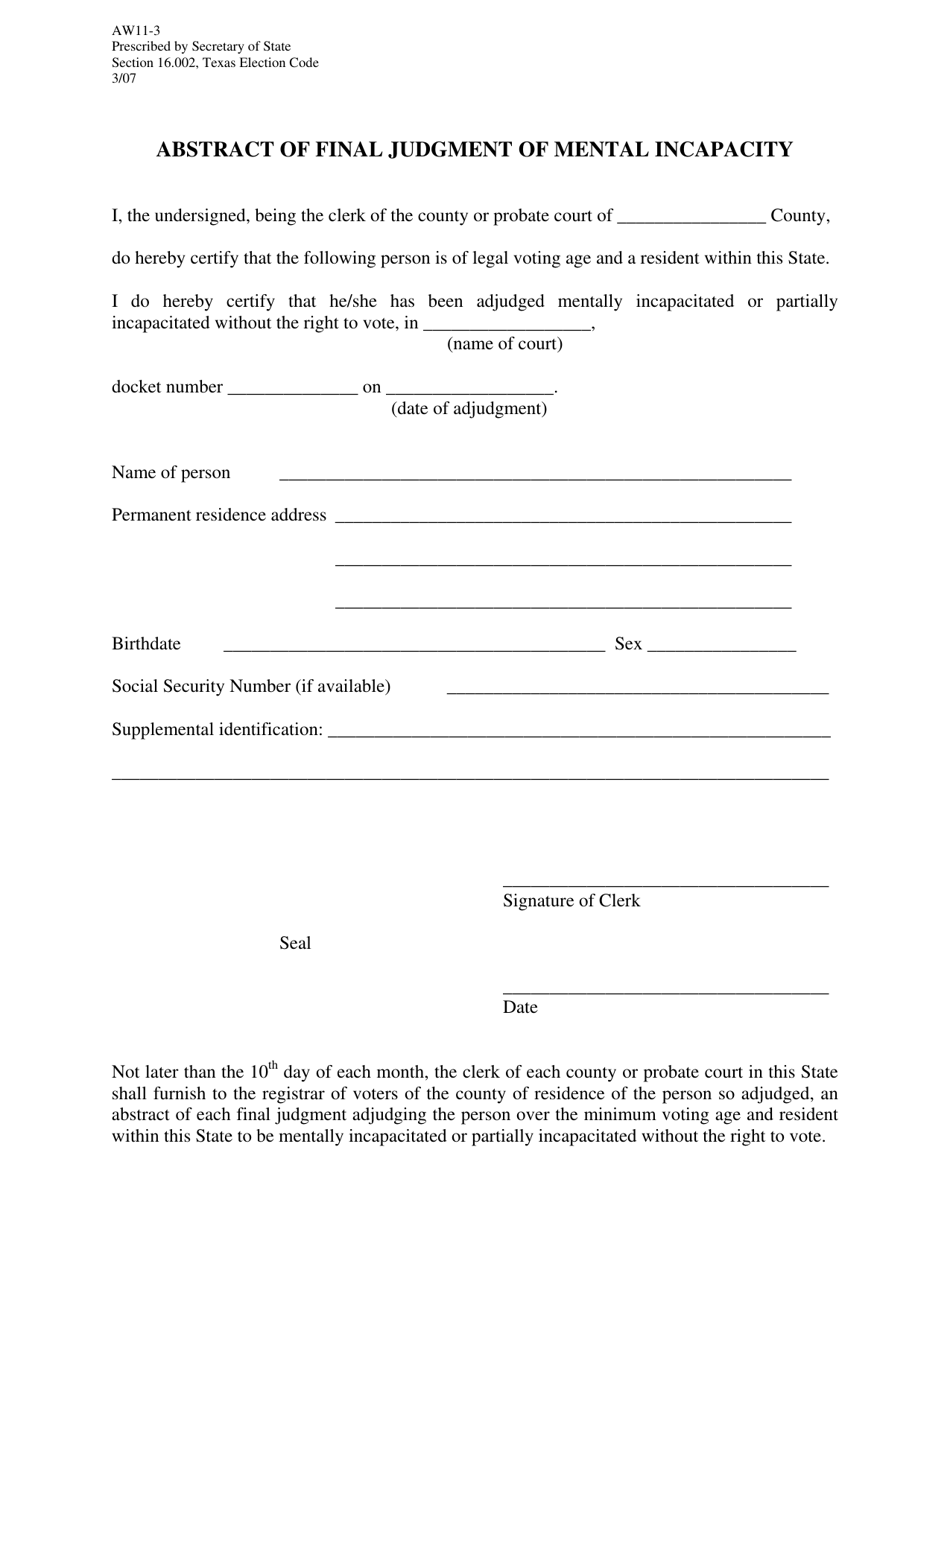 Form AW11-3 Abstract of Final Judgment of Mental Incapacity - Texas, Page 1